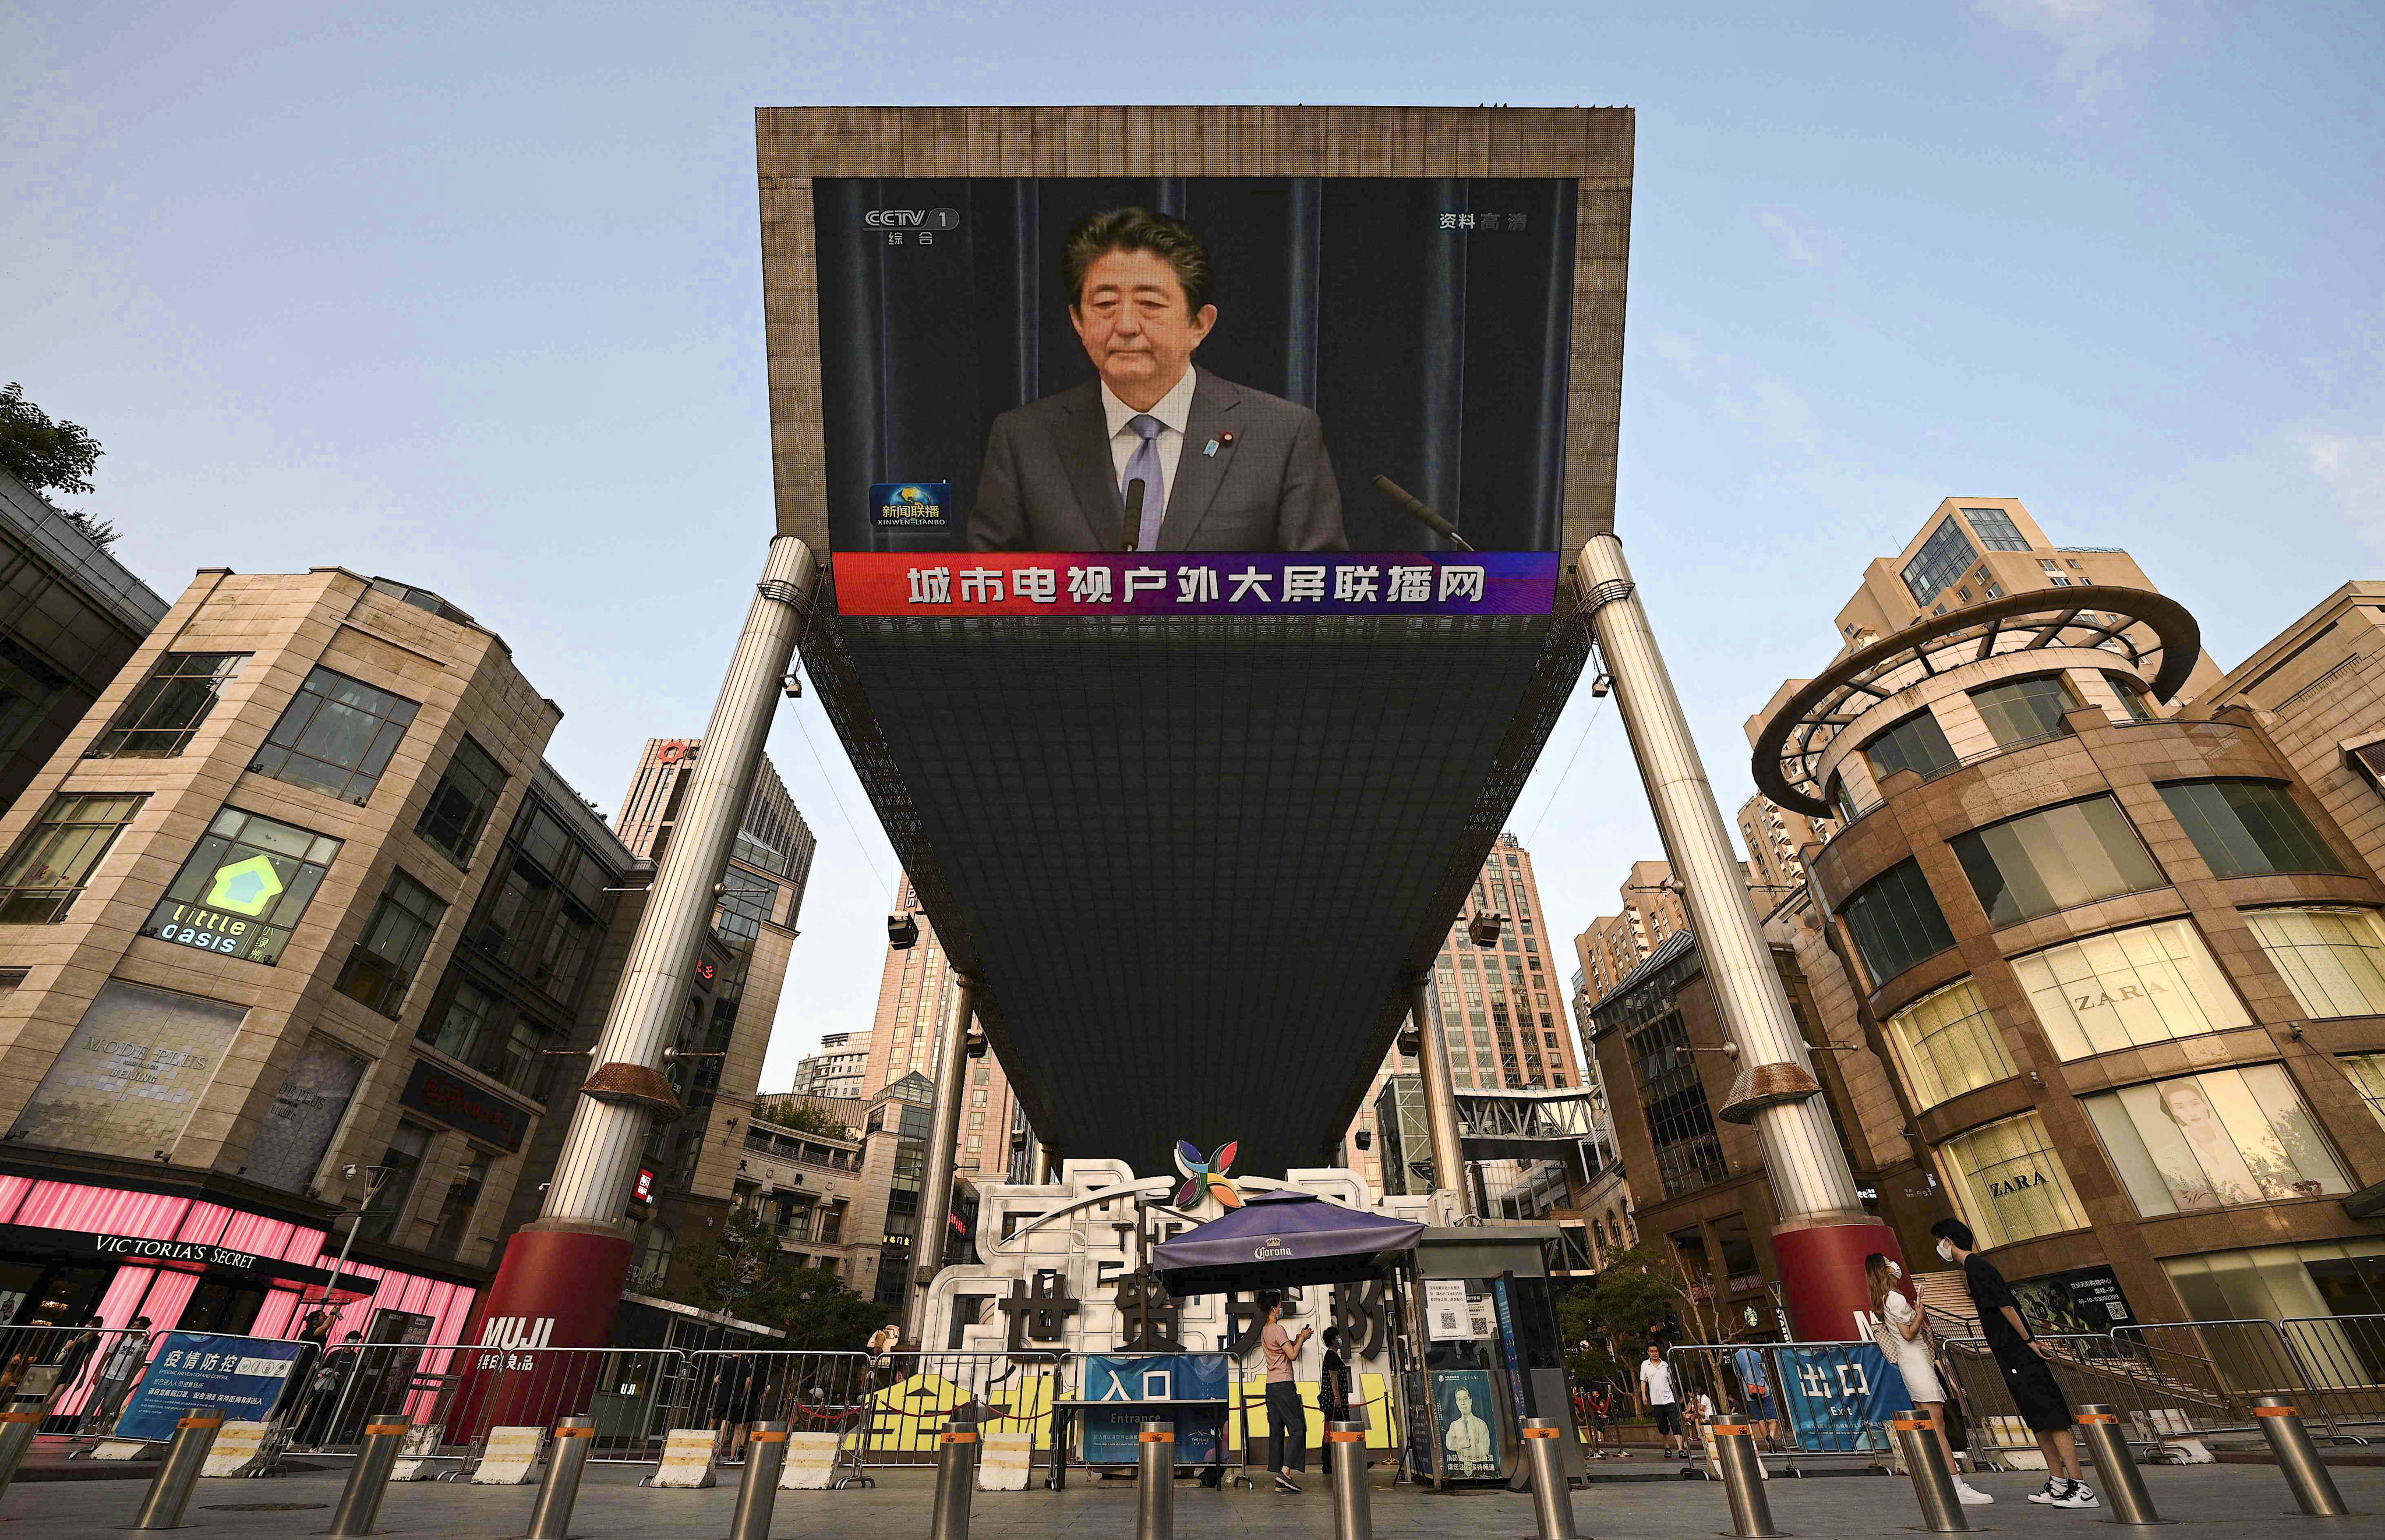 A large streetside screen  broadcasts news of former Japanese prime minister Shinzo Abe’s assassination,  in Beijing on July 8. Photo: AFP